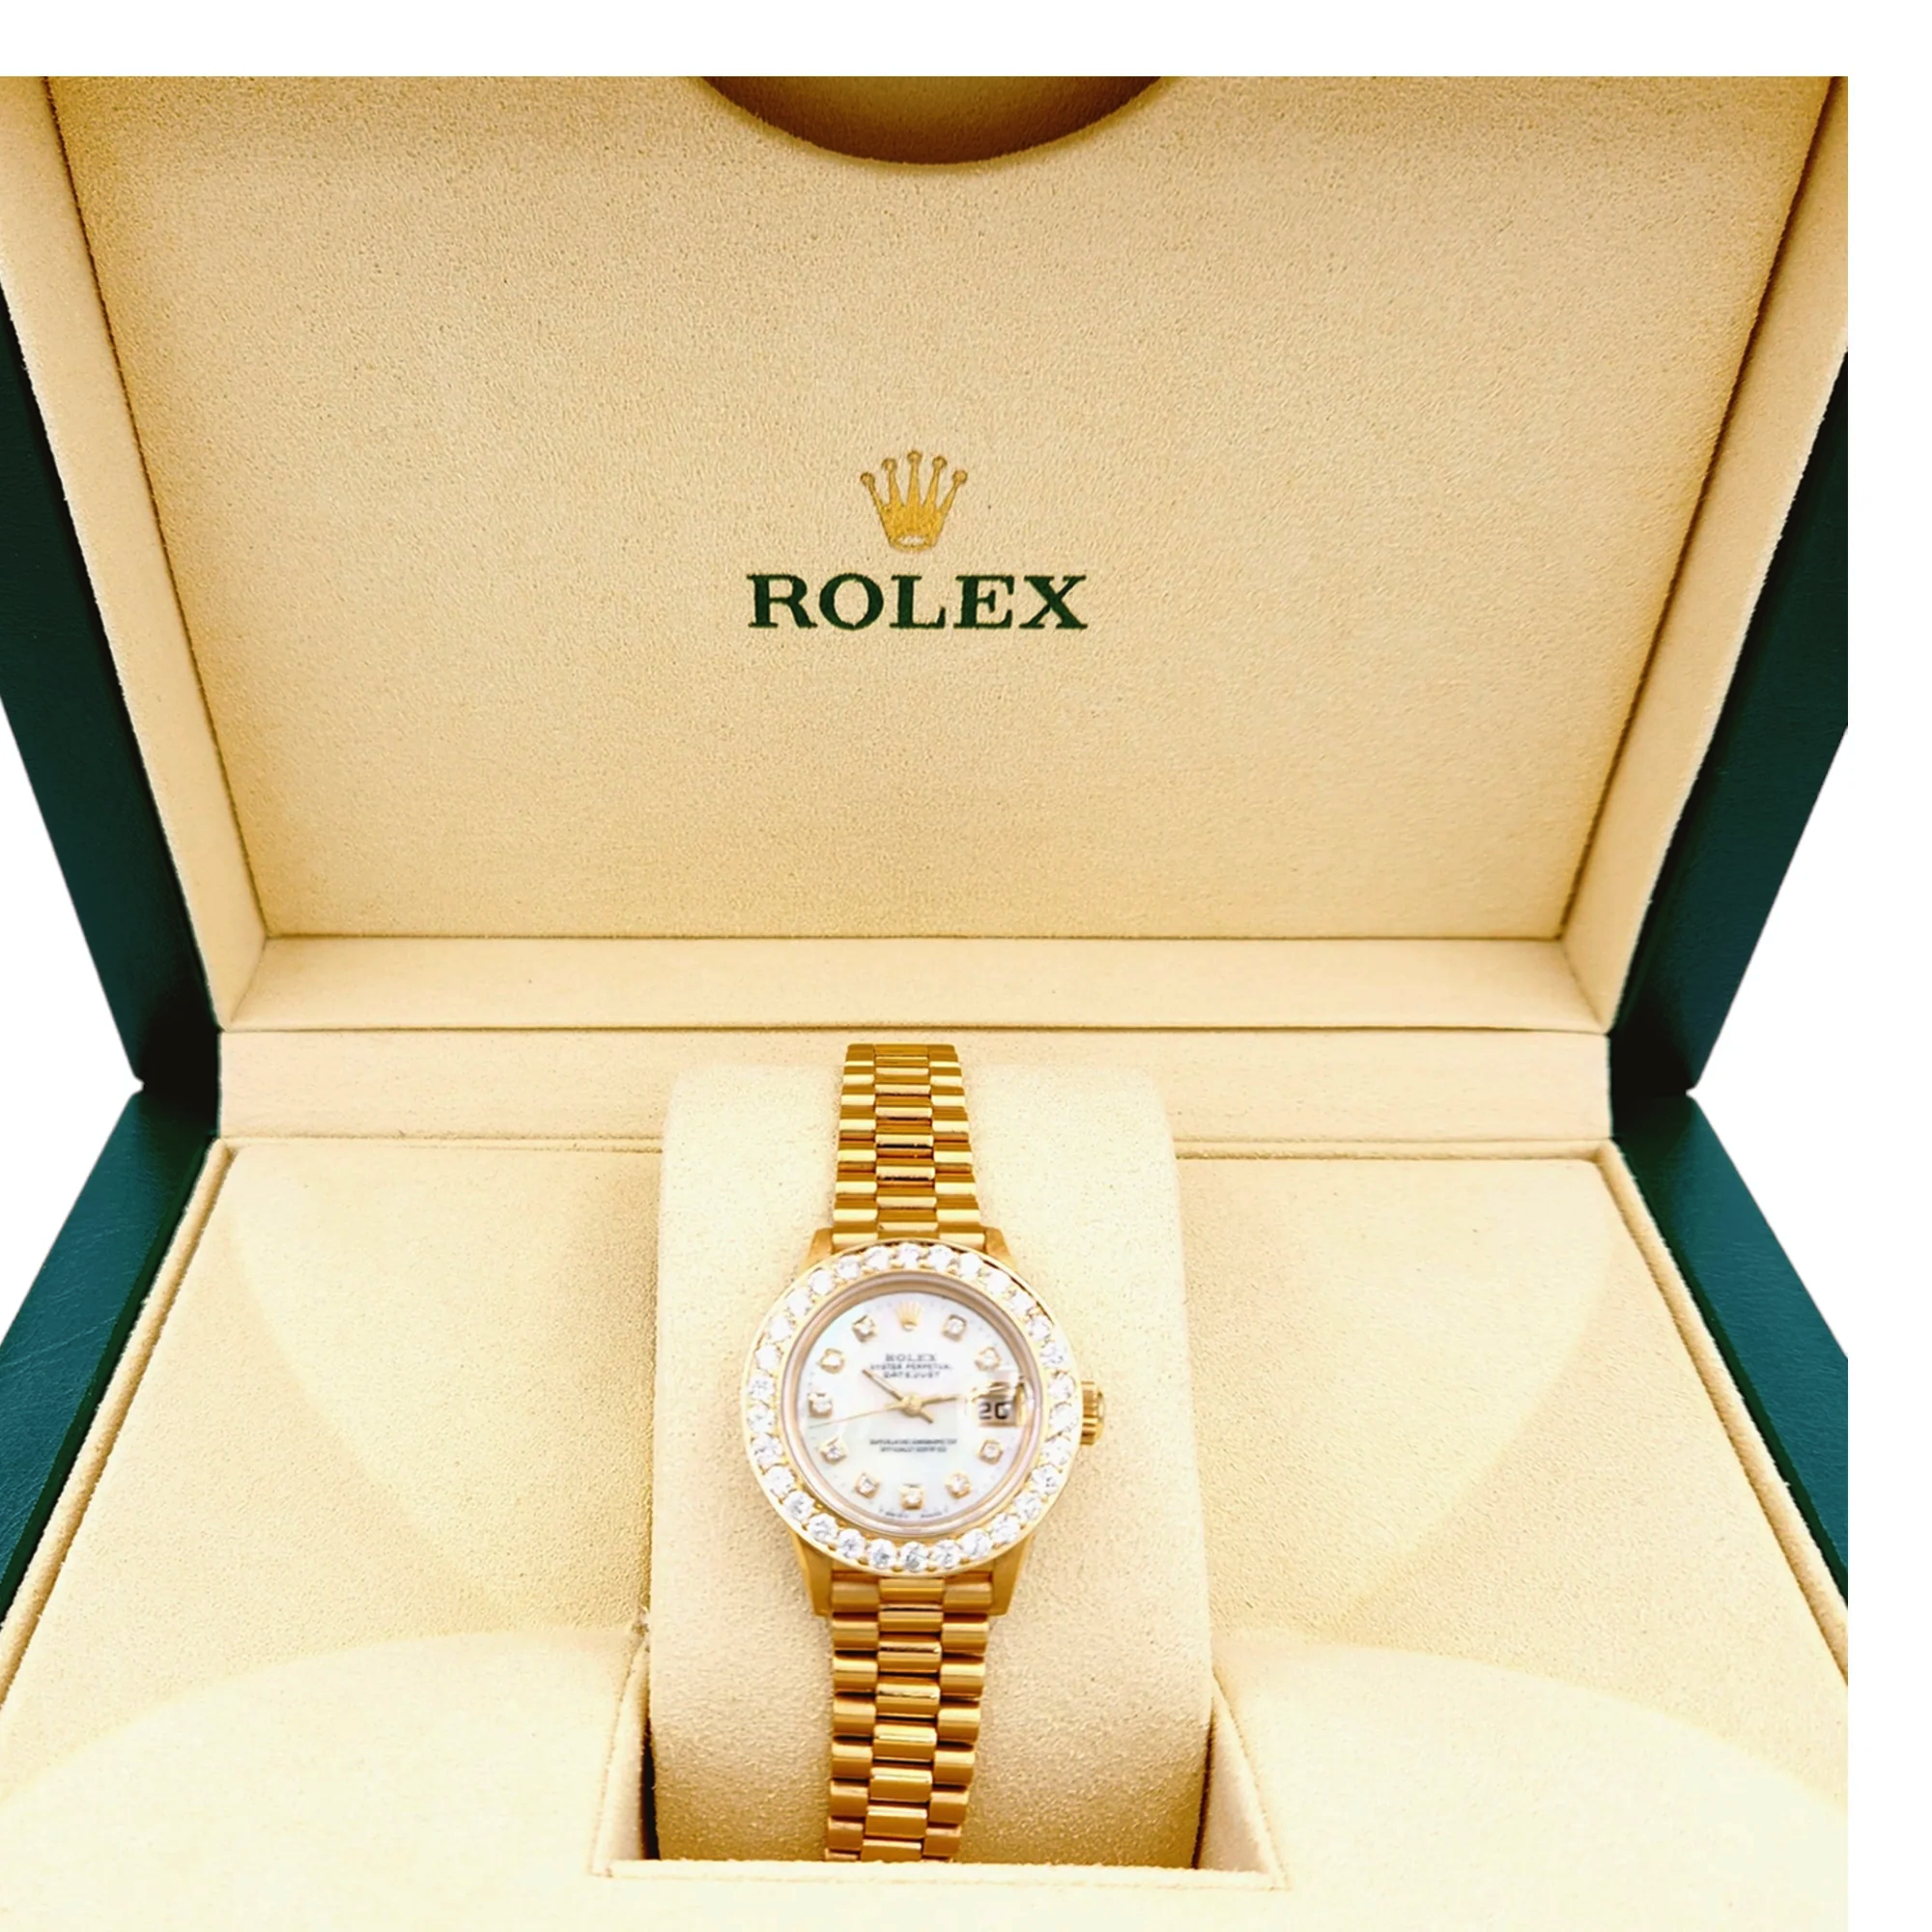 *Ladies Rolex 26mm Presidential 18K Solid Yellow Gold Watch with Mother of Pearl Diamond Dial and 2CT. Diamond Bezel. (UNWORN 69178)